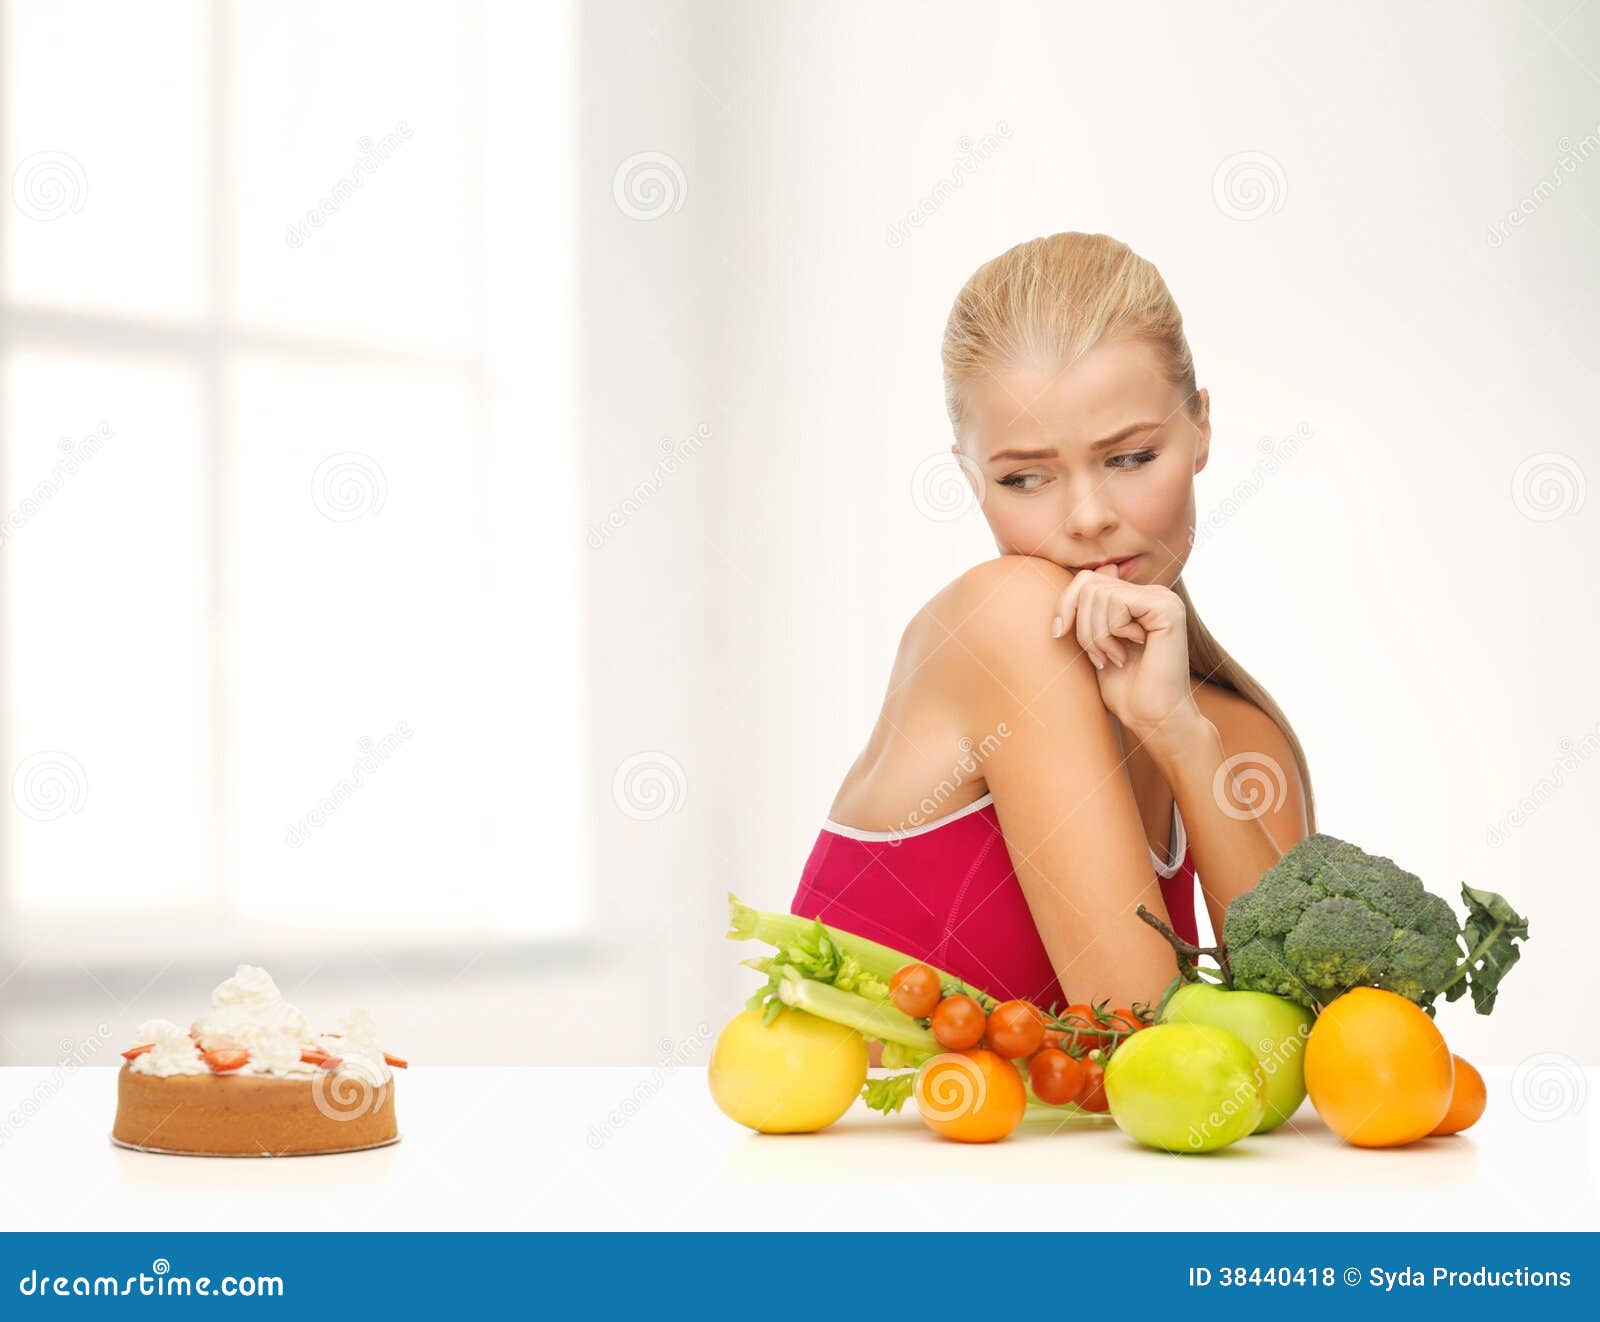 doubting woman with fruits and pie